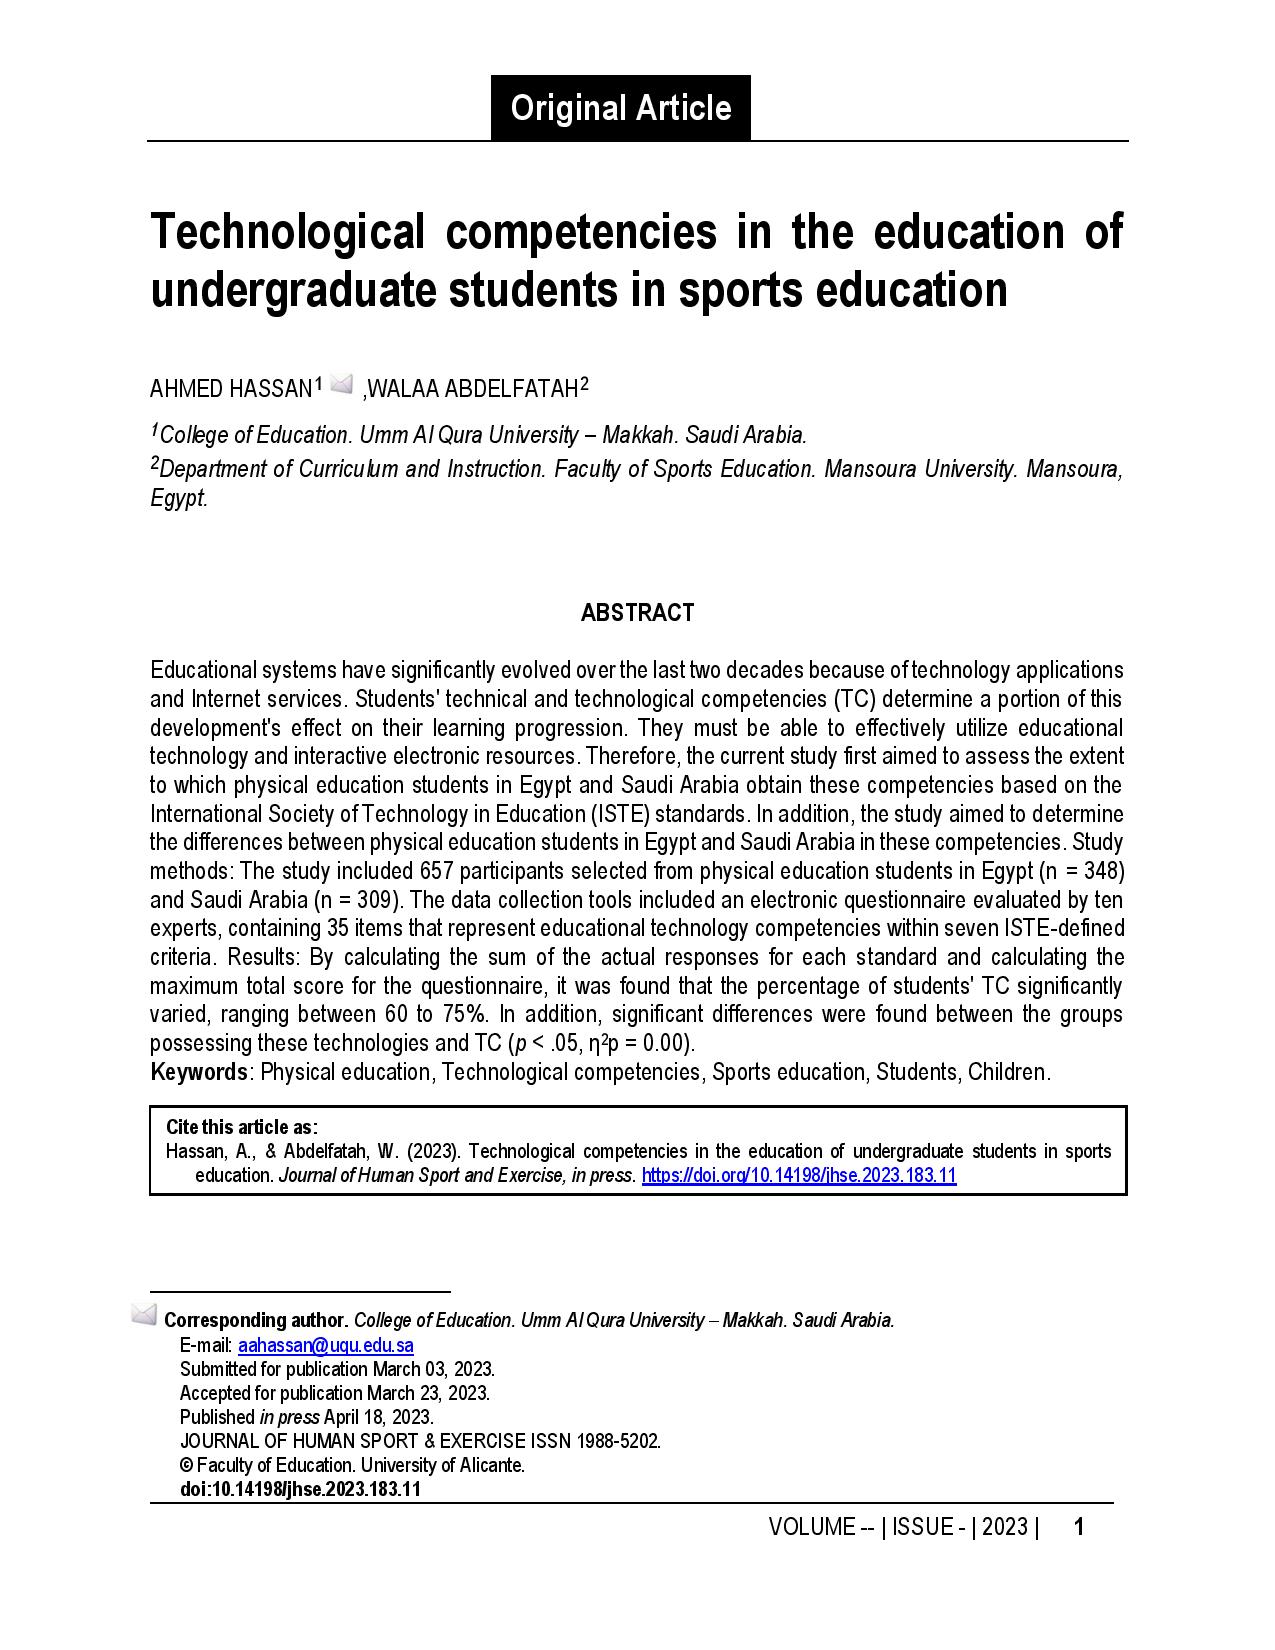 Technological competencies in the education of undergraduate students in sports education